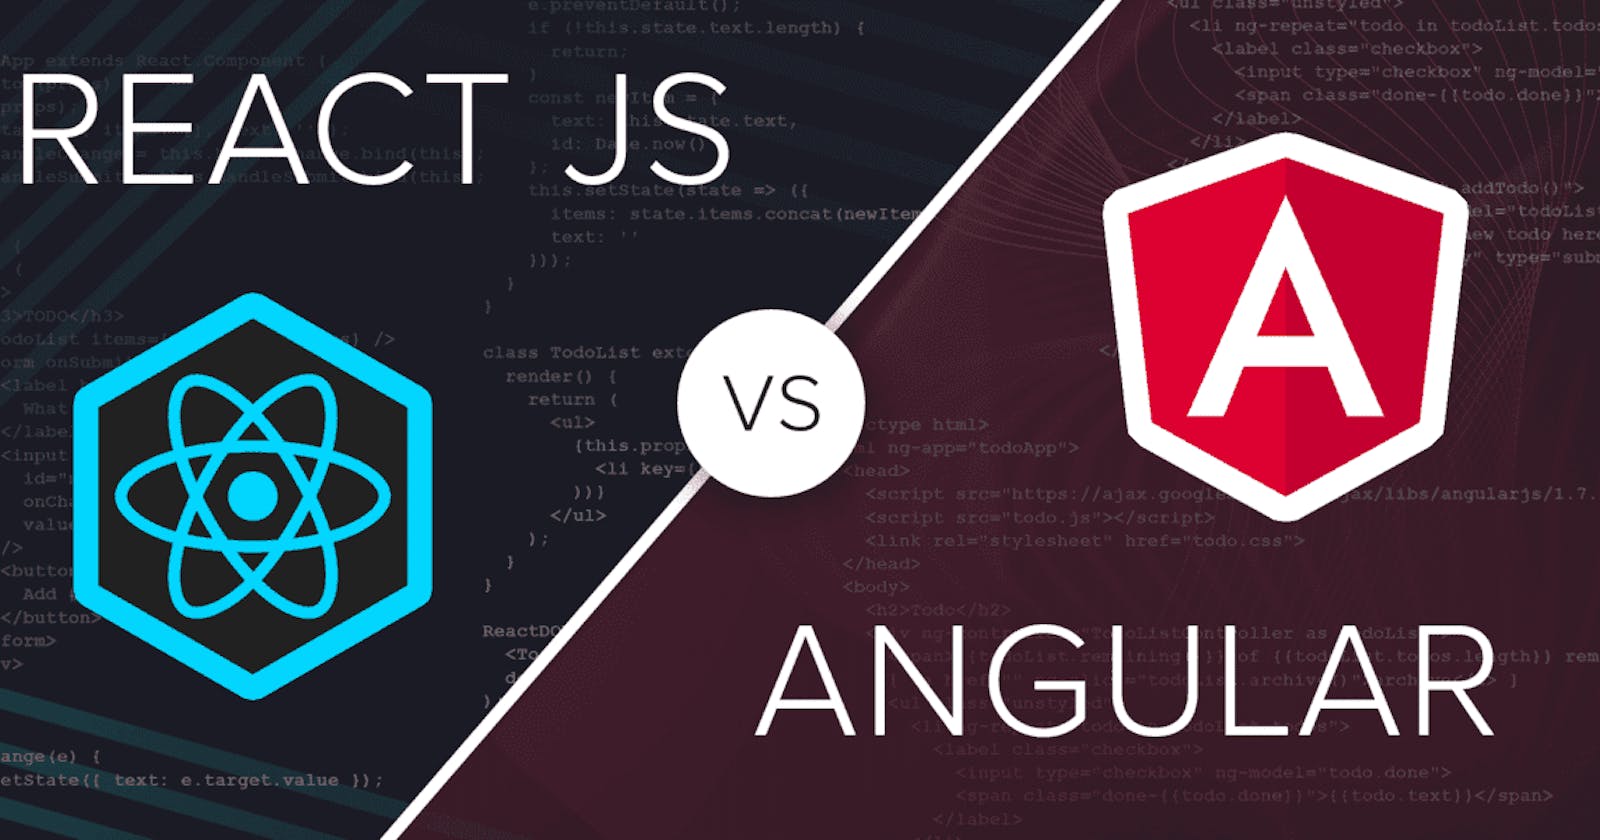 How to Choose Between Angular and React for Your Next Project?